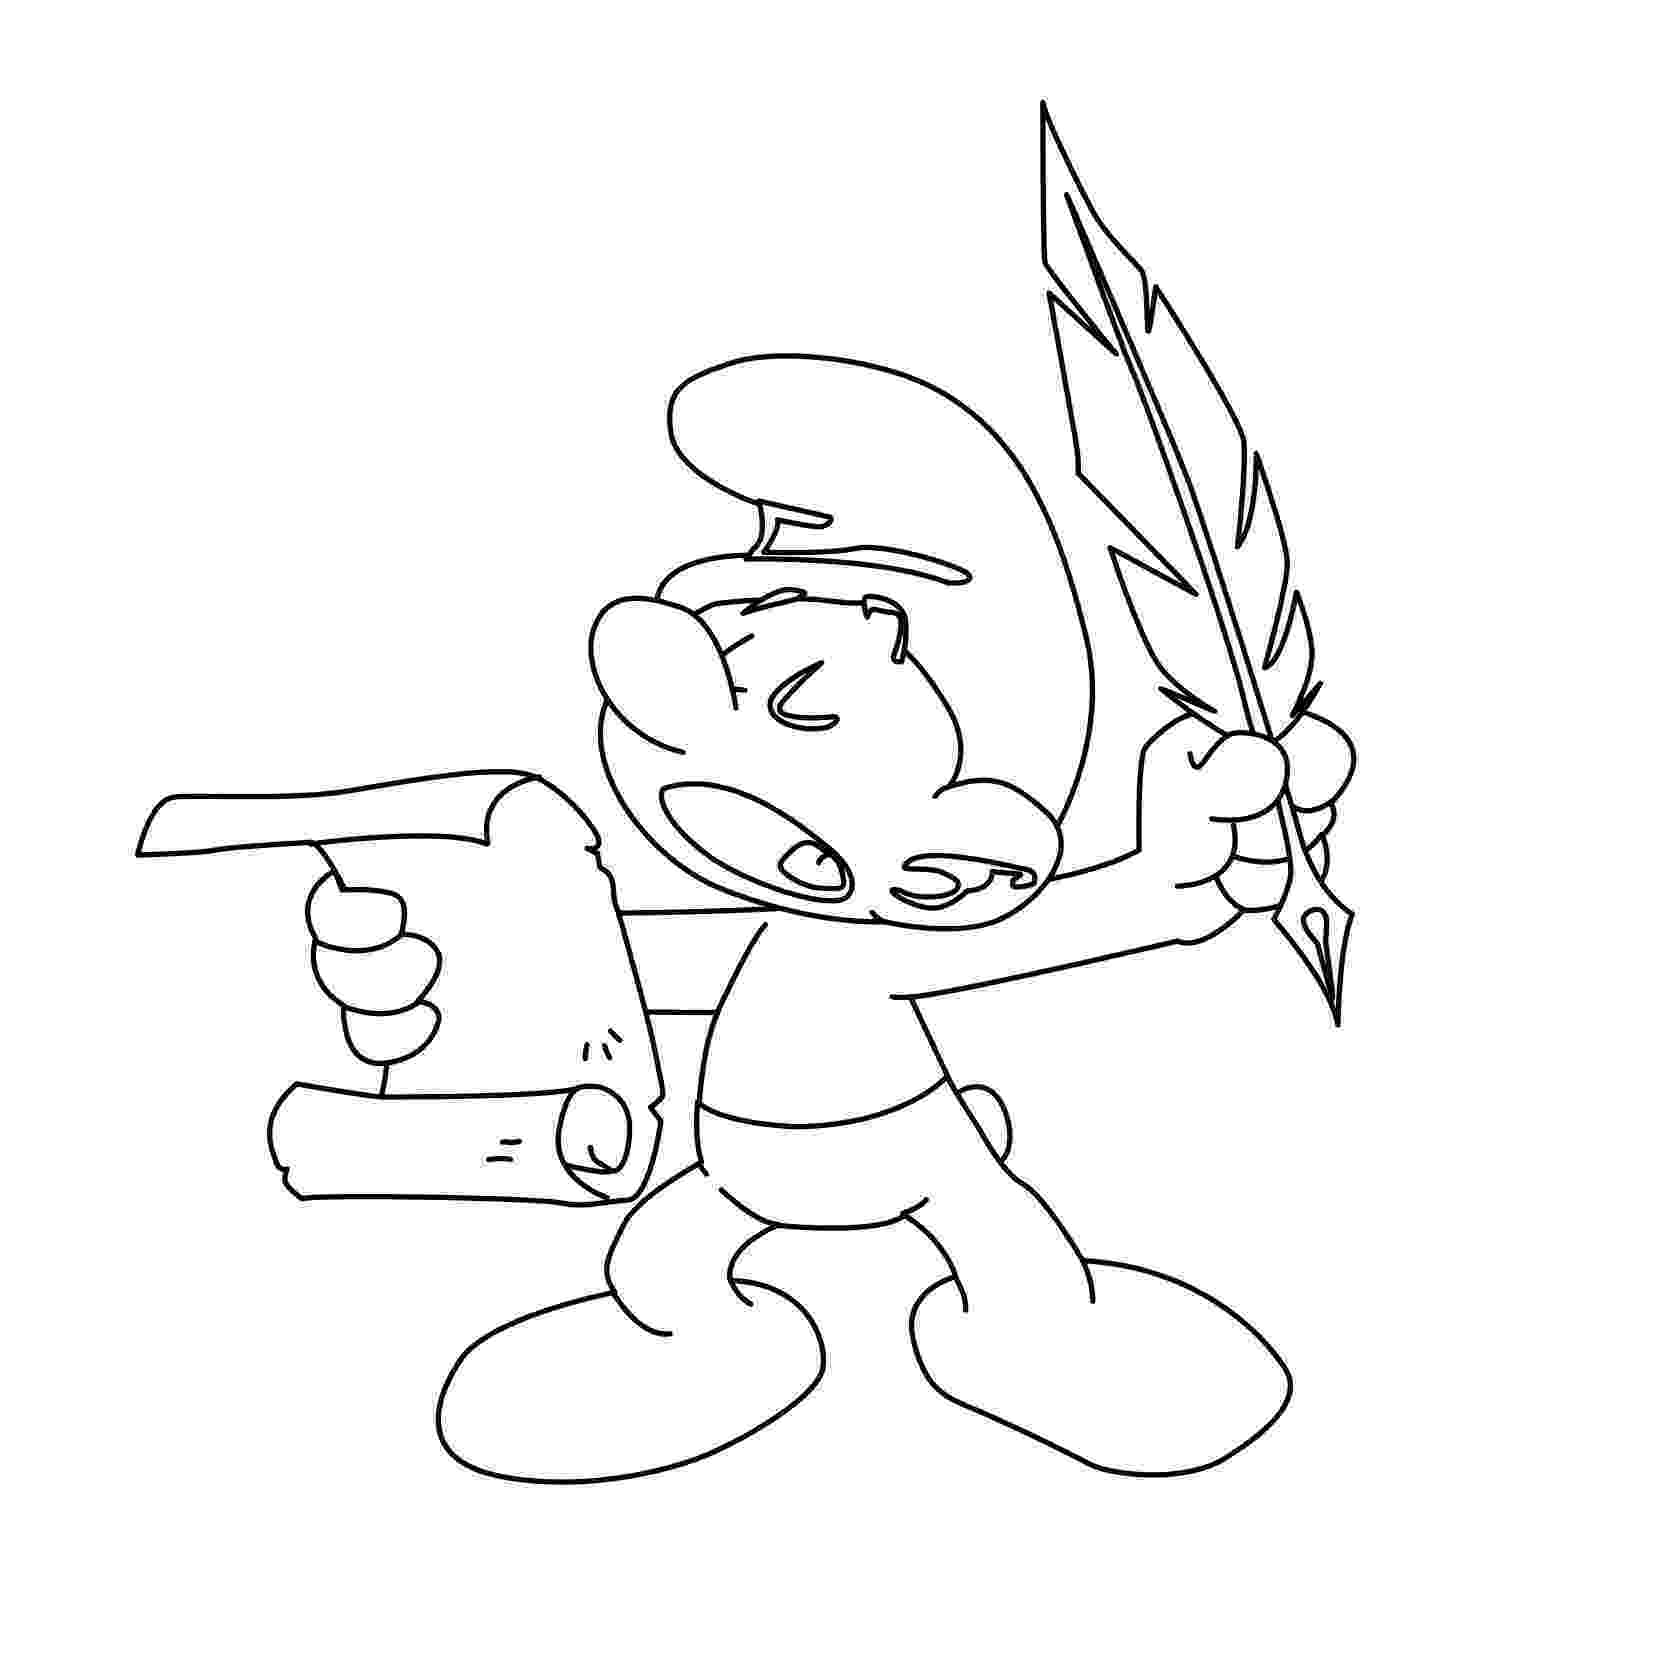 smurf pictures free printable smurf coloring pages for kids pictures smurf 1 2